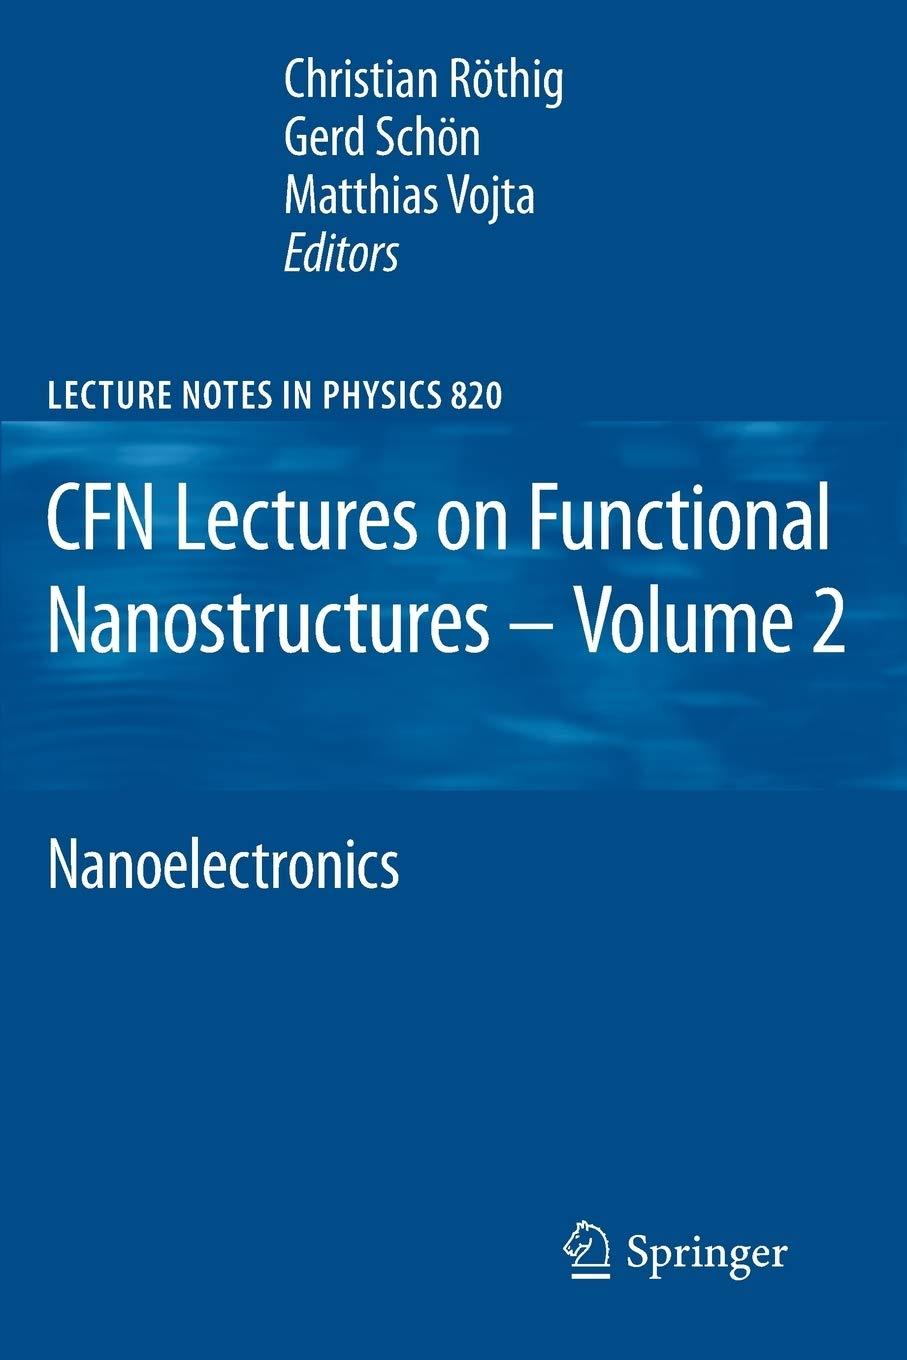 cfn lectures on functional nanostructures volume 2 nanoelectronics 1st edition christian röthig, gerd